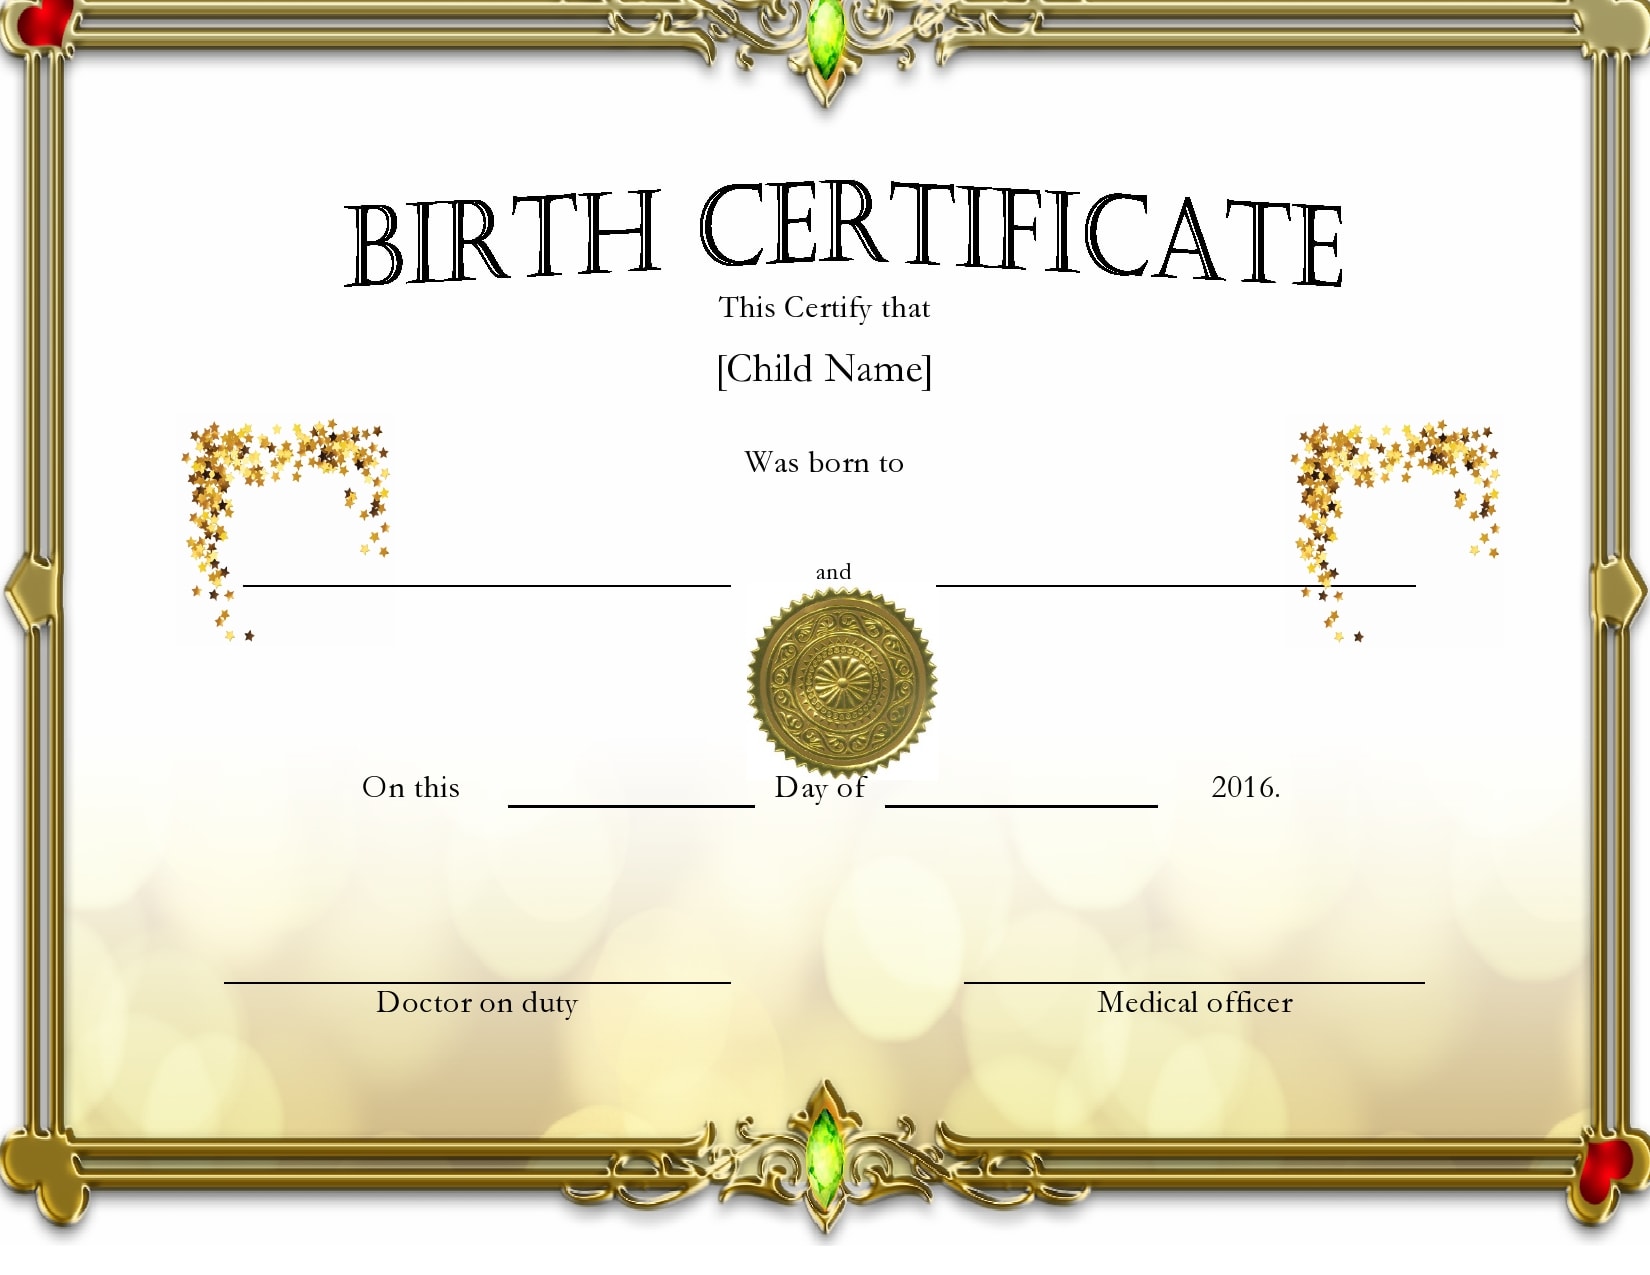 20 Blank Birth Certificate Templates (& Examples) - PrintableTemplates Regarding Fake Birth Certificate Template